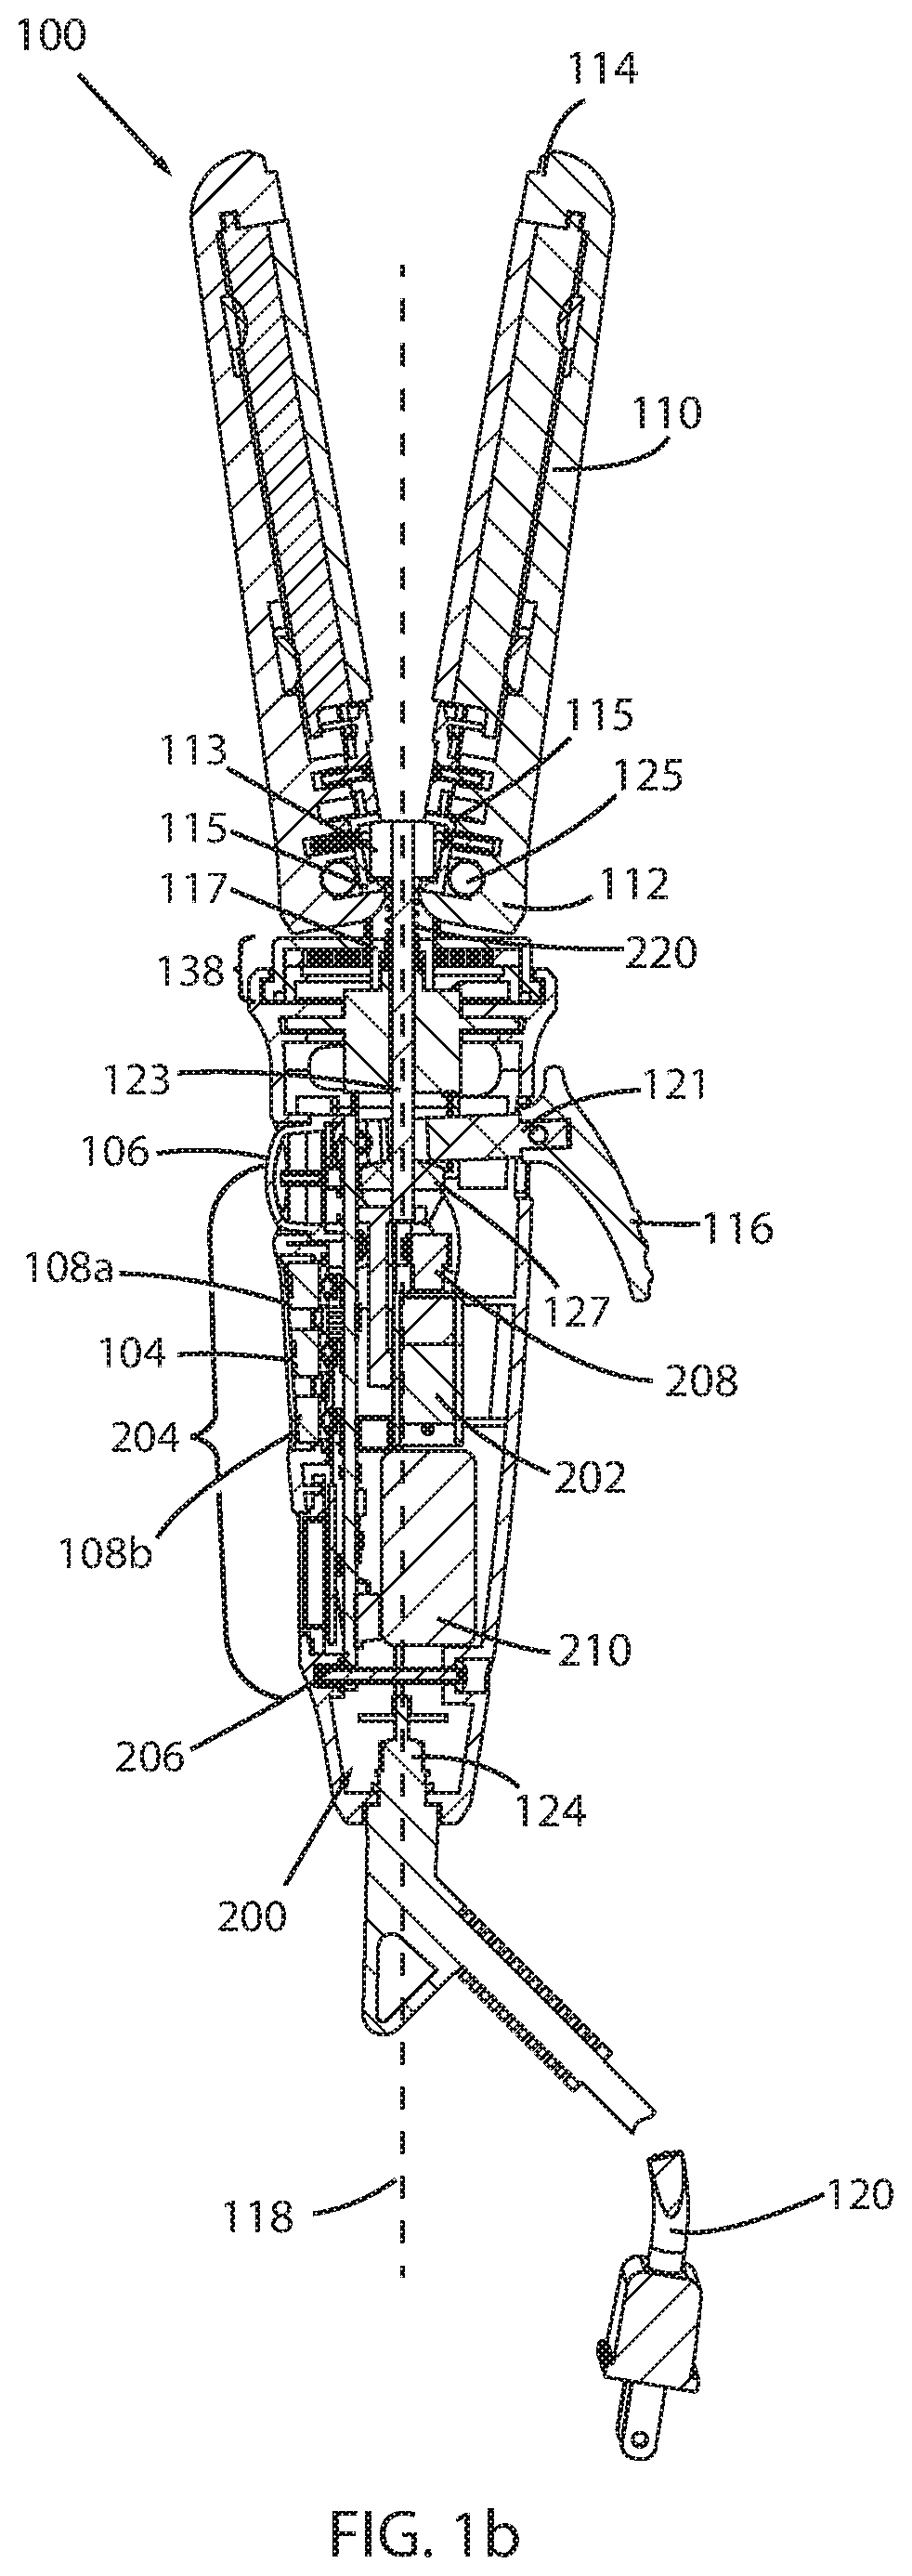 Auto-rotate hair iron assembly and method of styling hair to achieve at least one curl style based on extent of rotation